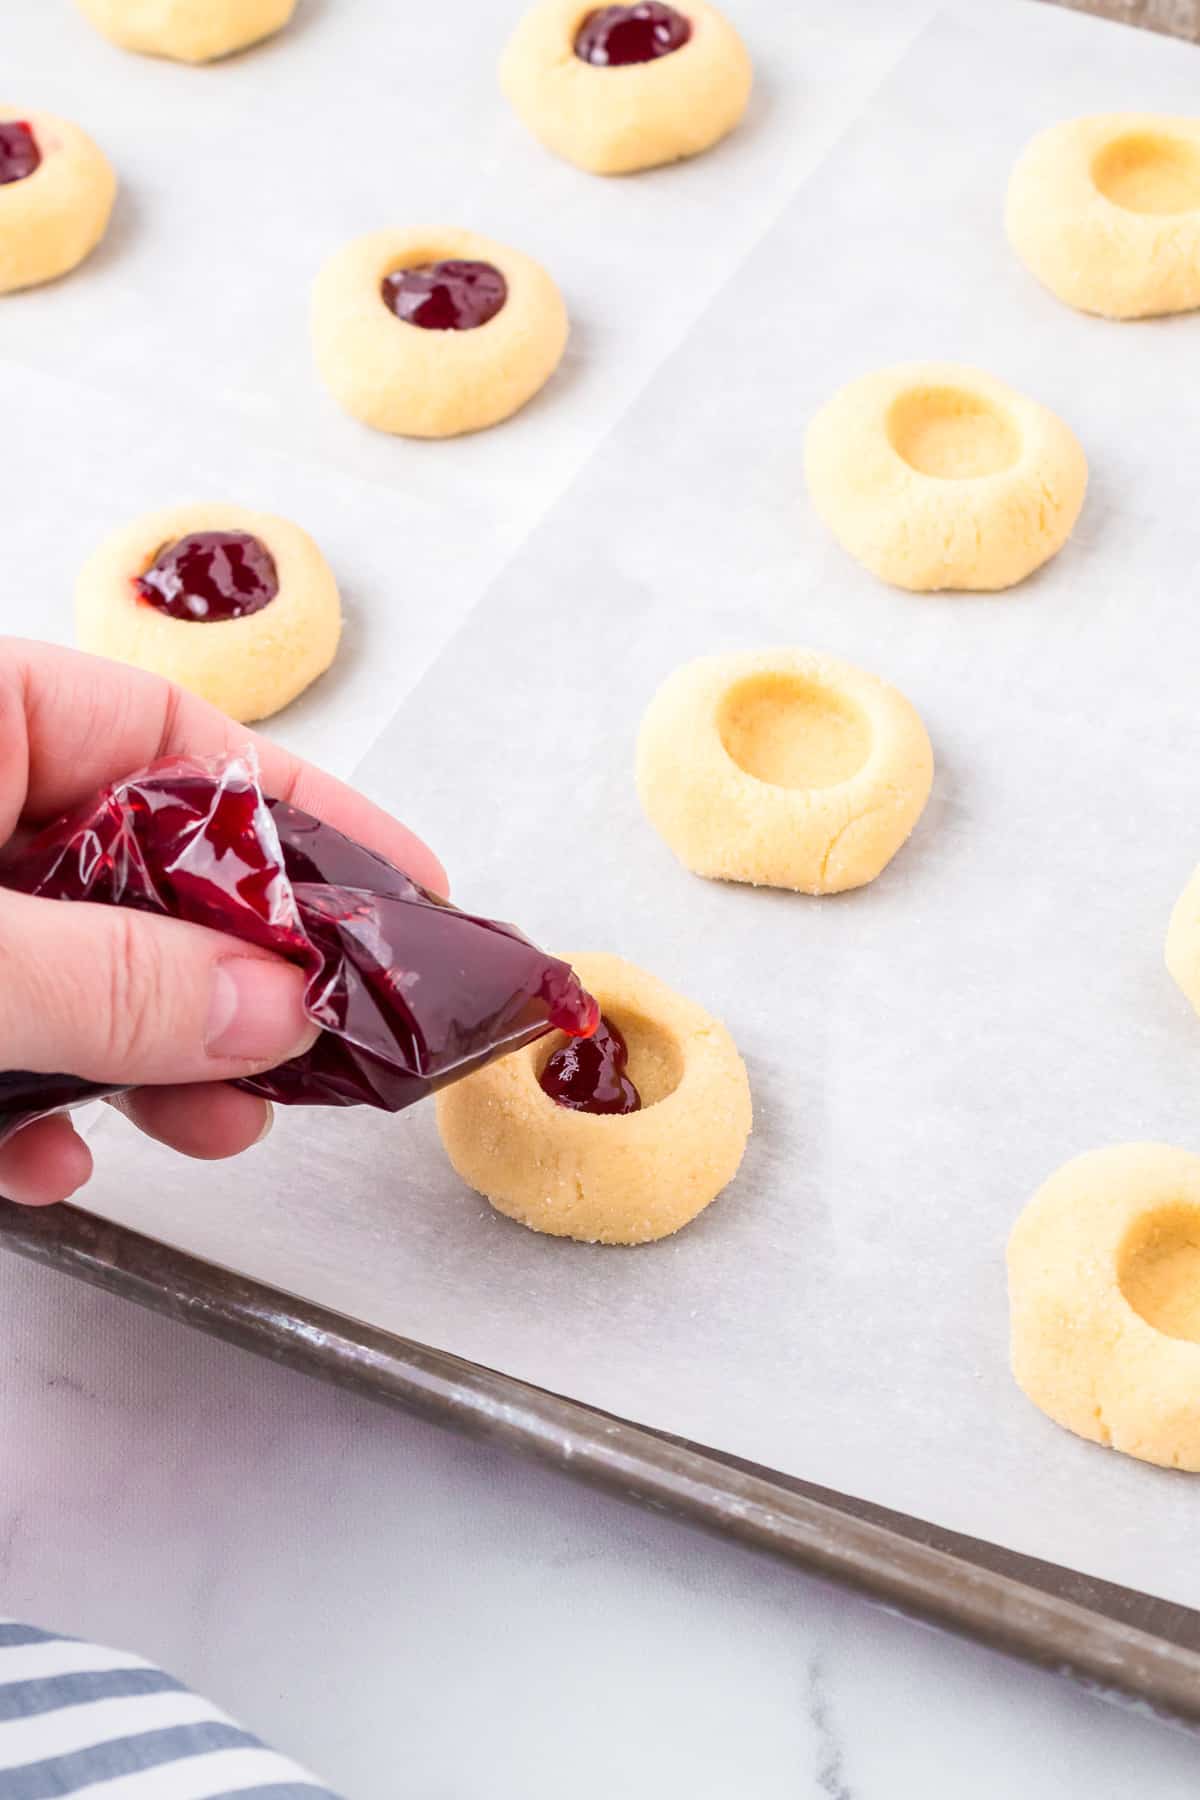 A person's hand filling the center of thumbprint cookies on a baking sheet with a bag filled with jam.